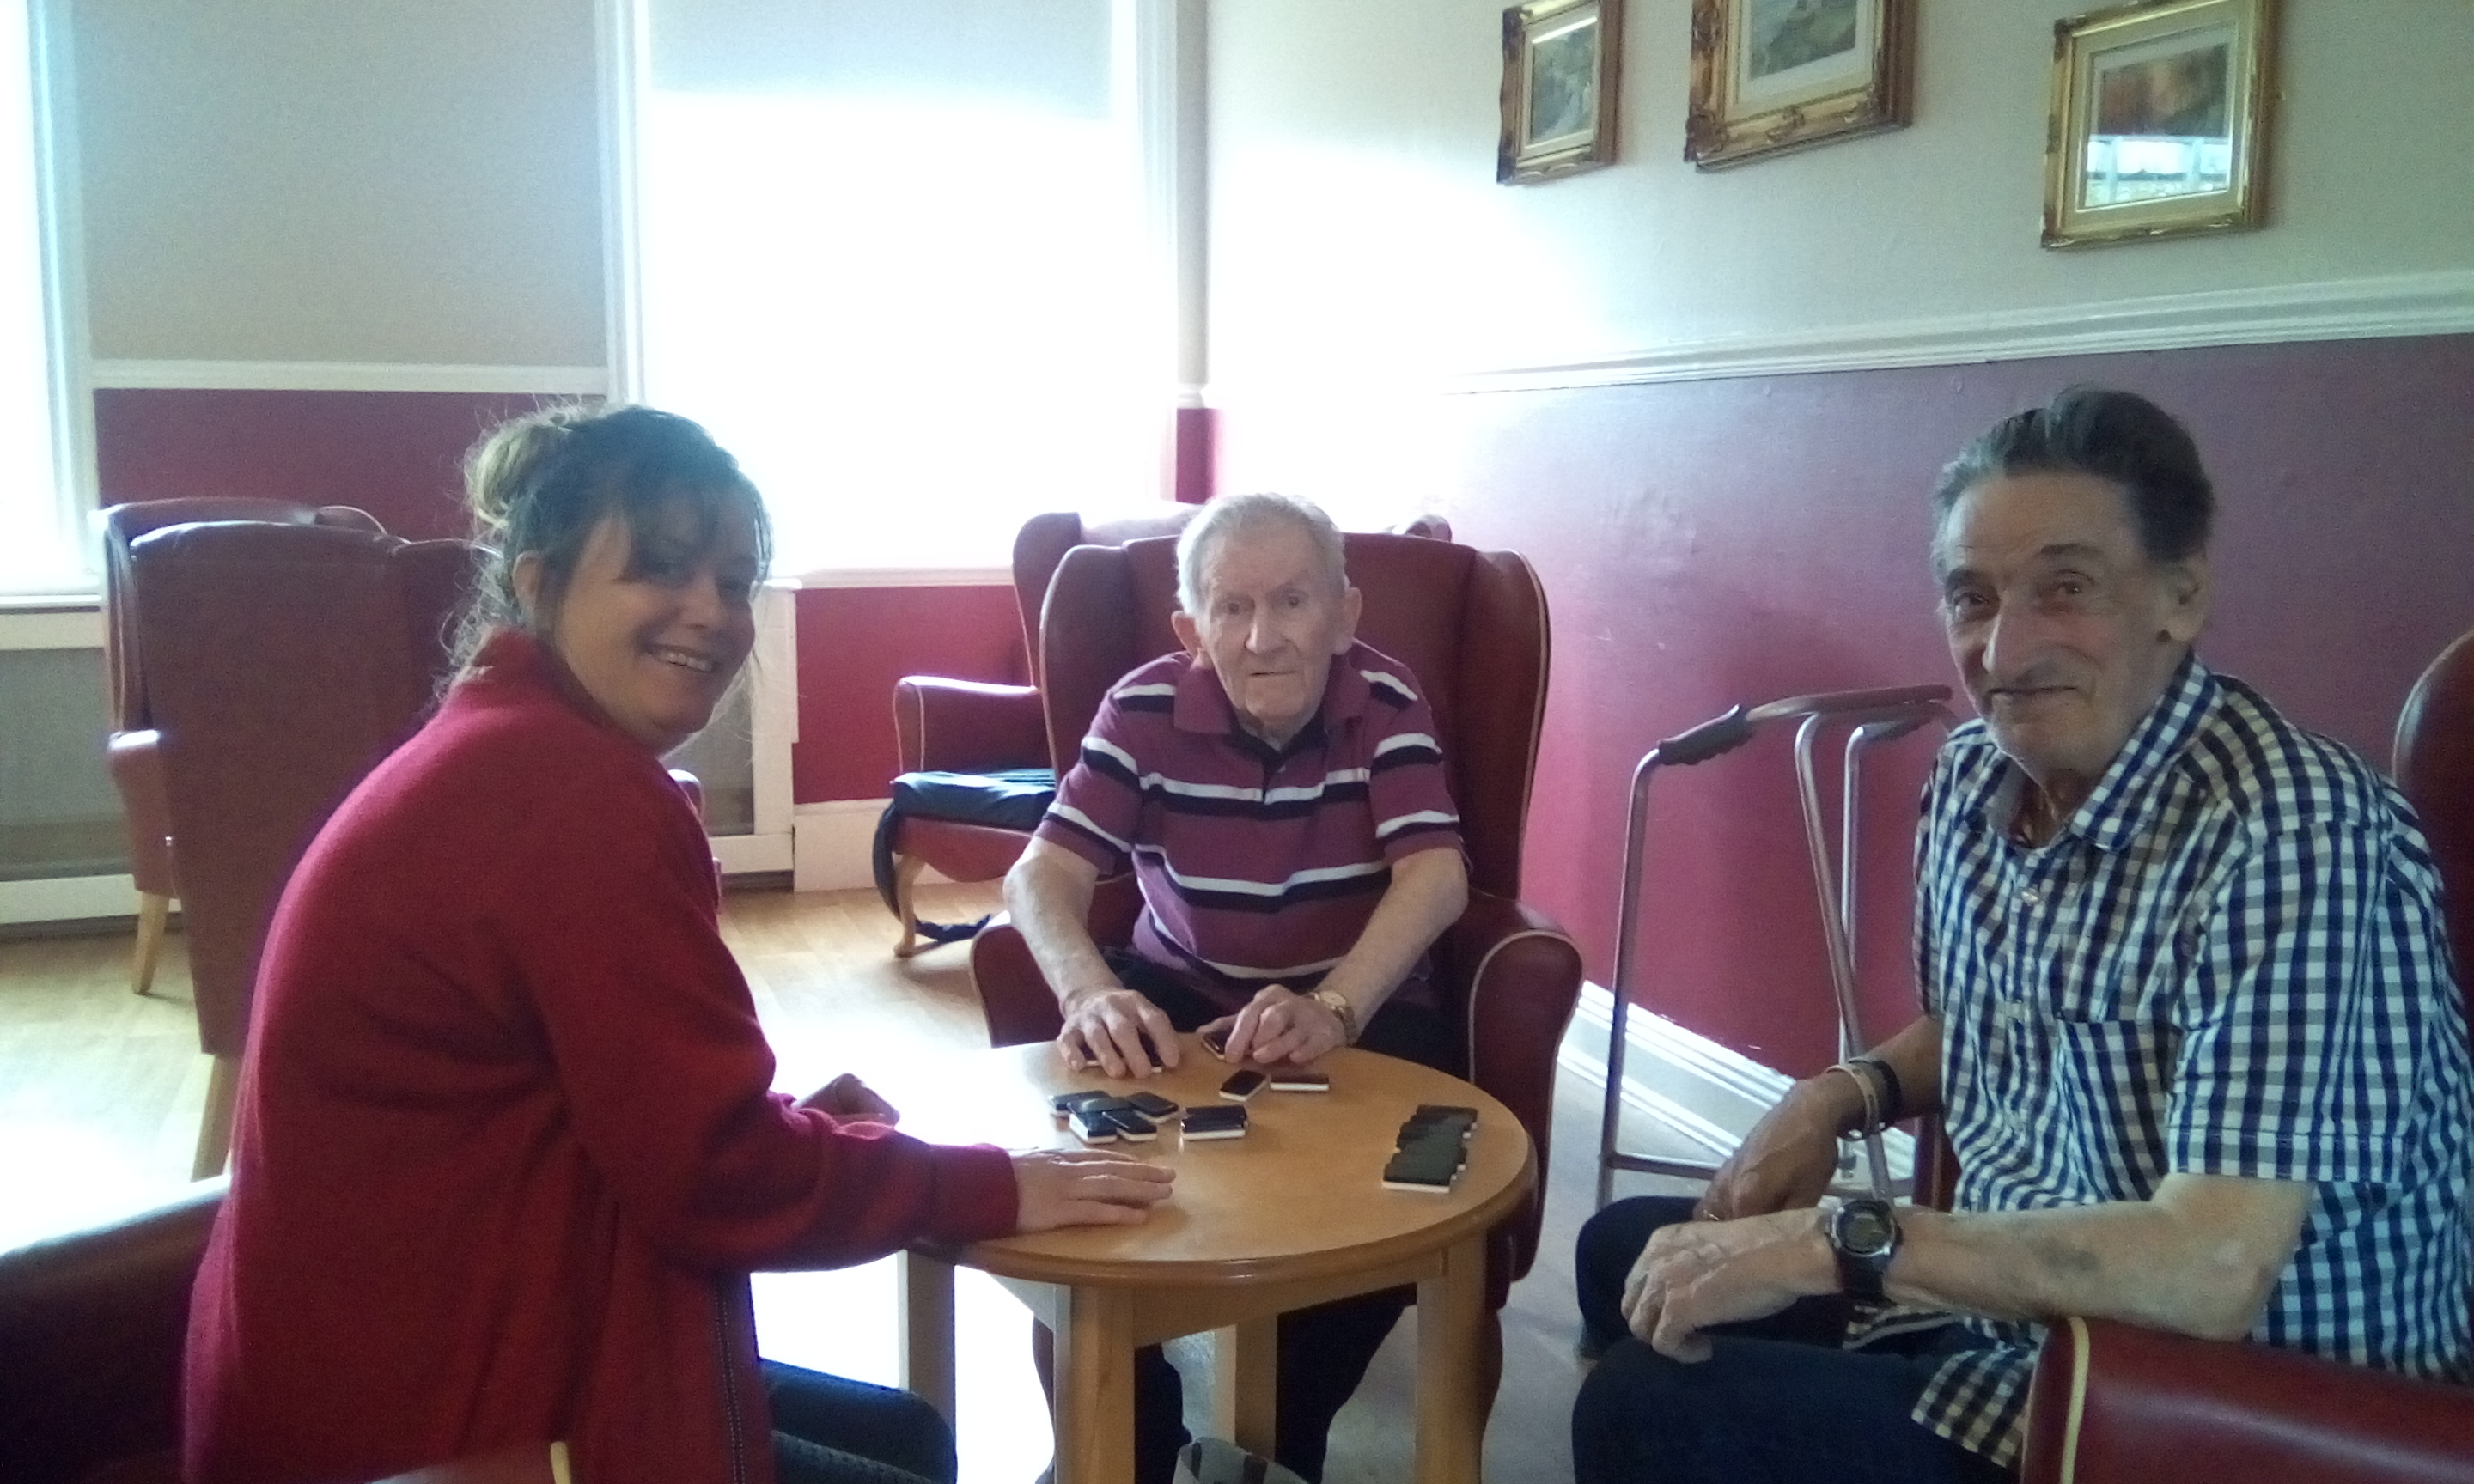 Motivation & Co play dominos at Victoria House Care Centre: Key Healthcare is dedicated to caring for elderly residents in safe. We have multiple dementia care homes including our care home middlesbrough, our care home St. Helen and care home saltburn. We excel in monitoring and improving care levels.